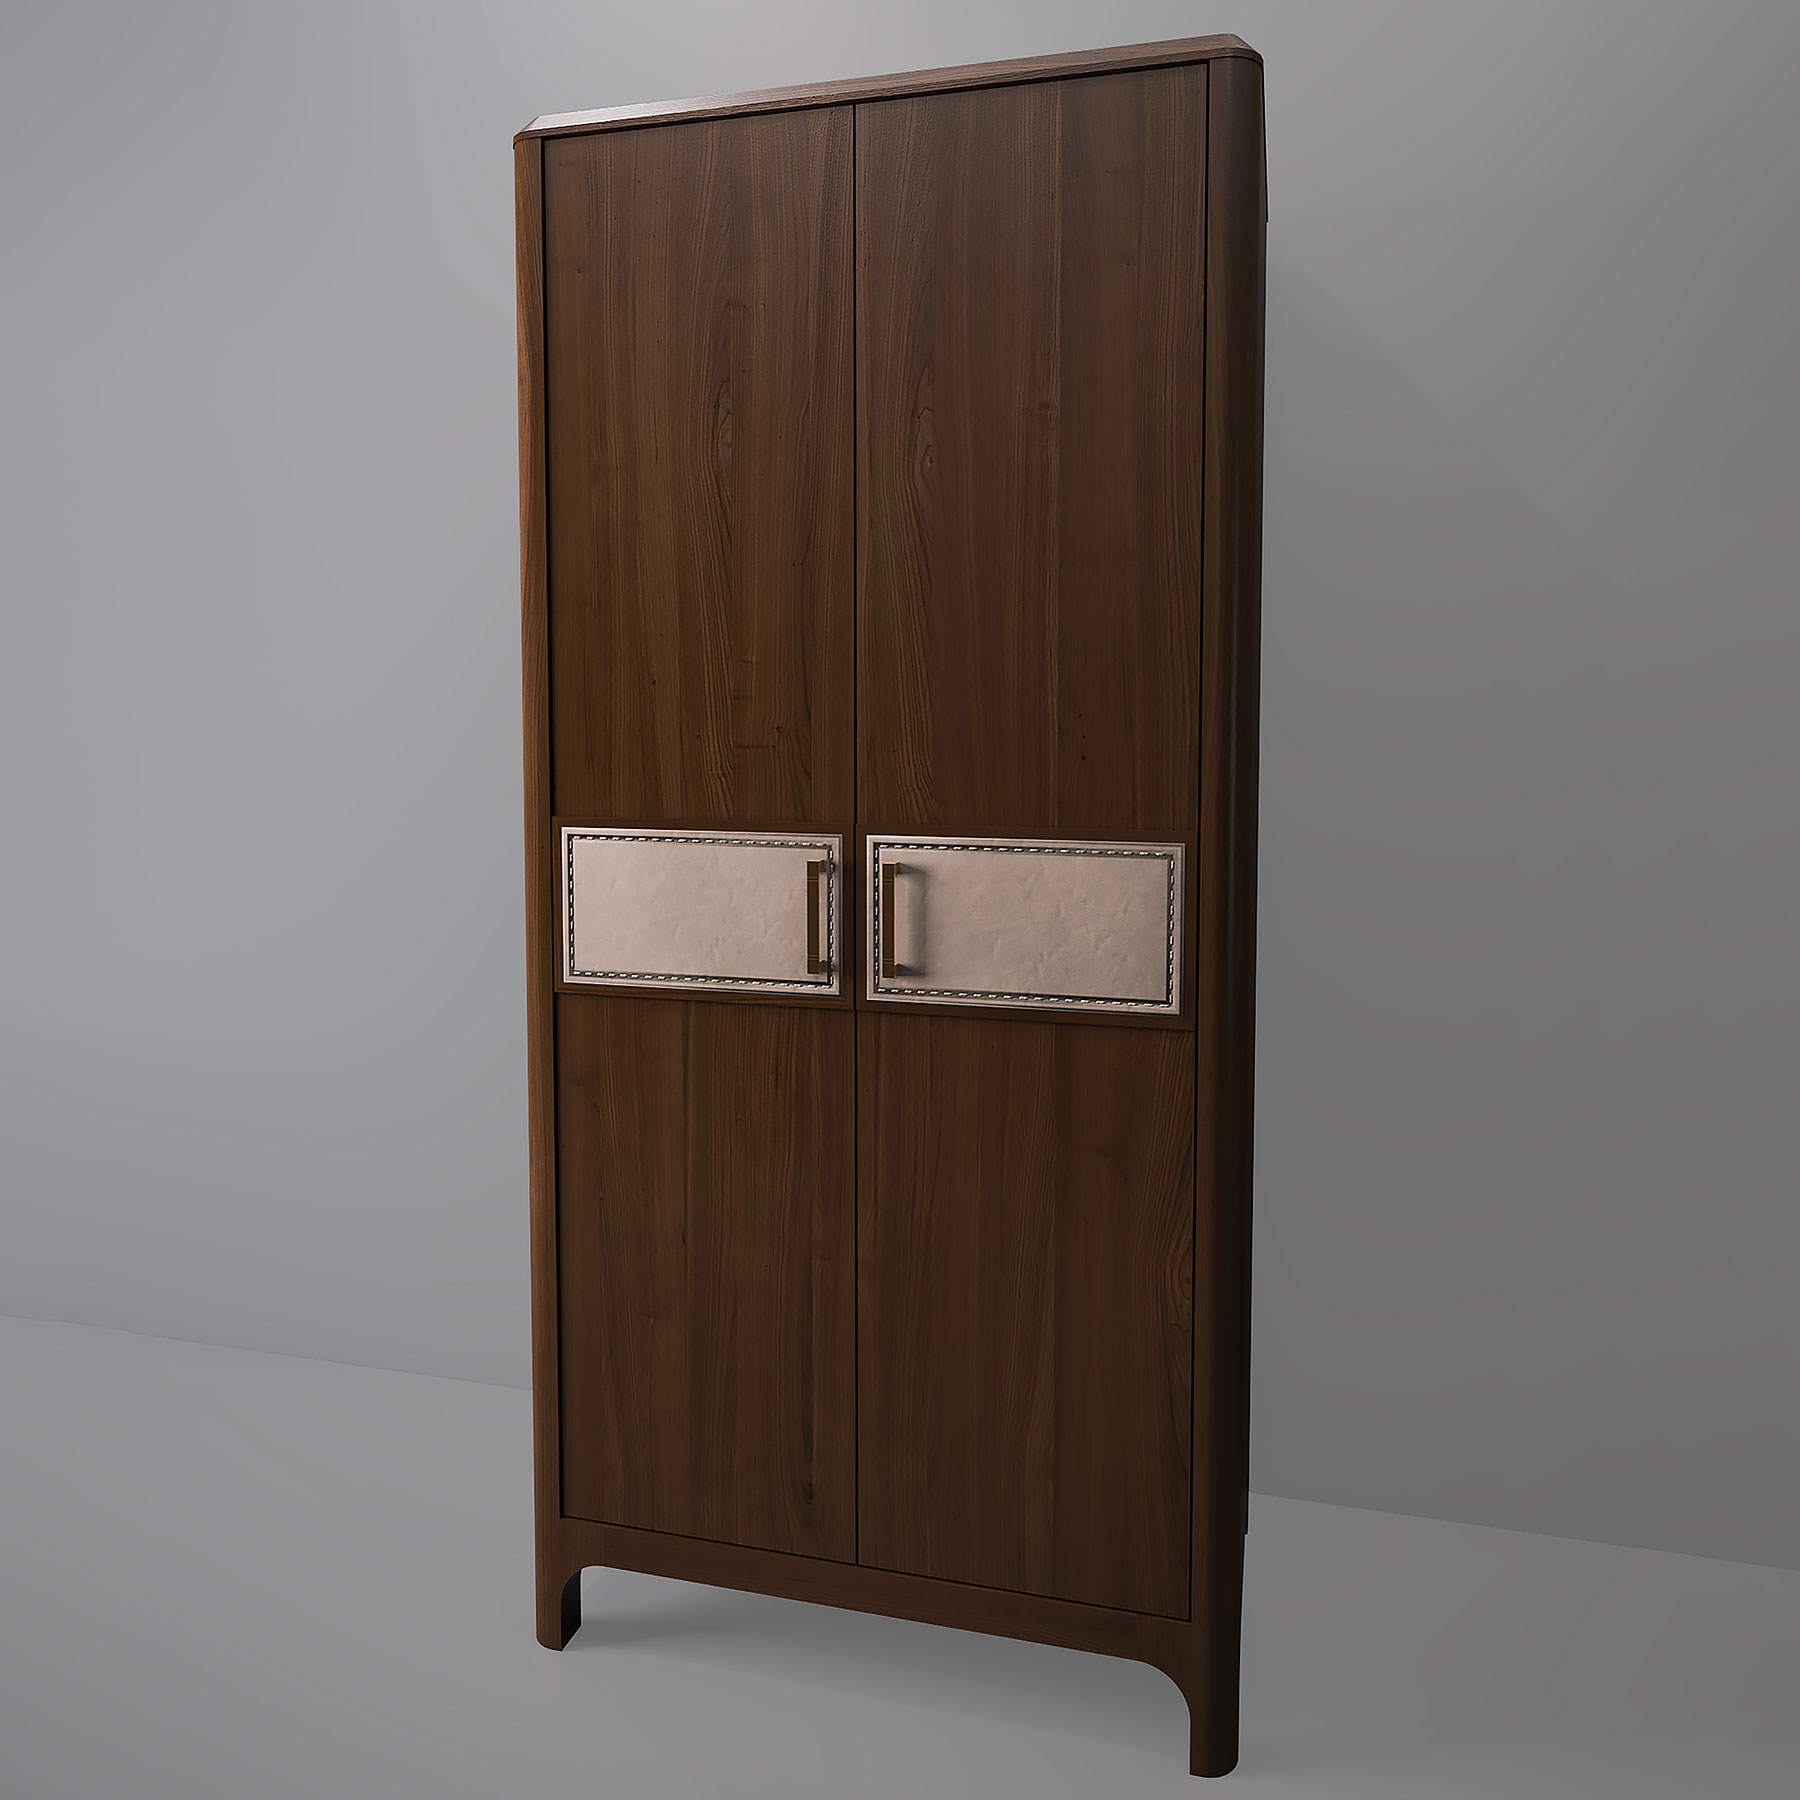 Two-door wardrobe from the Audrey collection 2